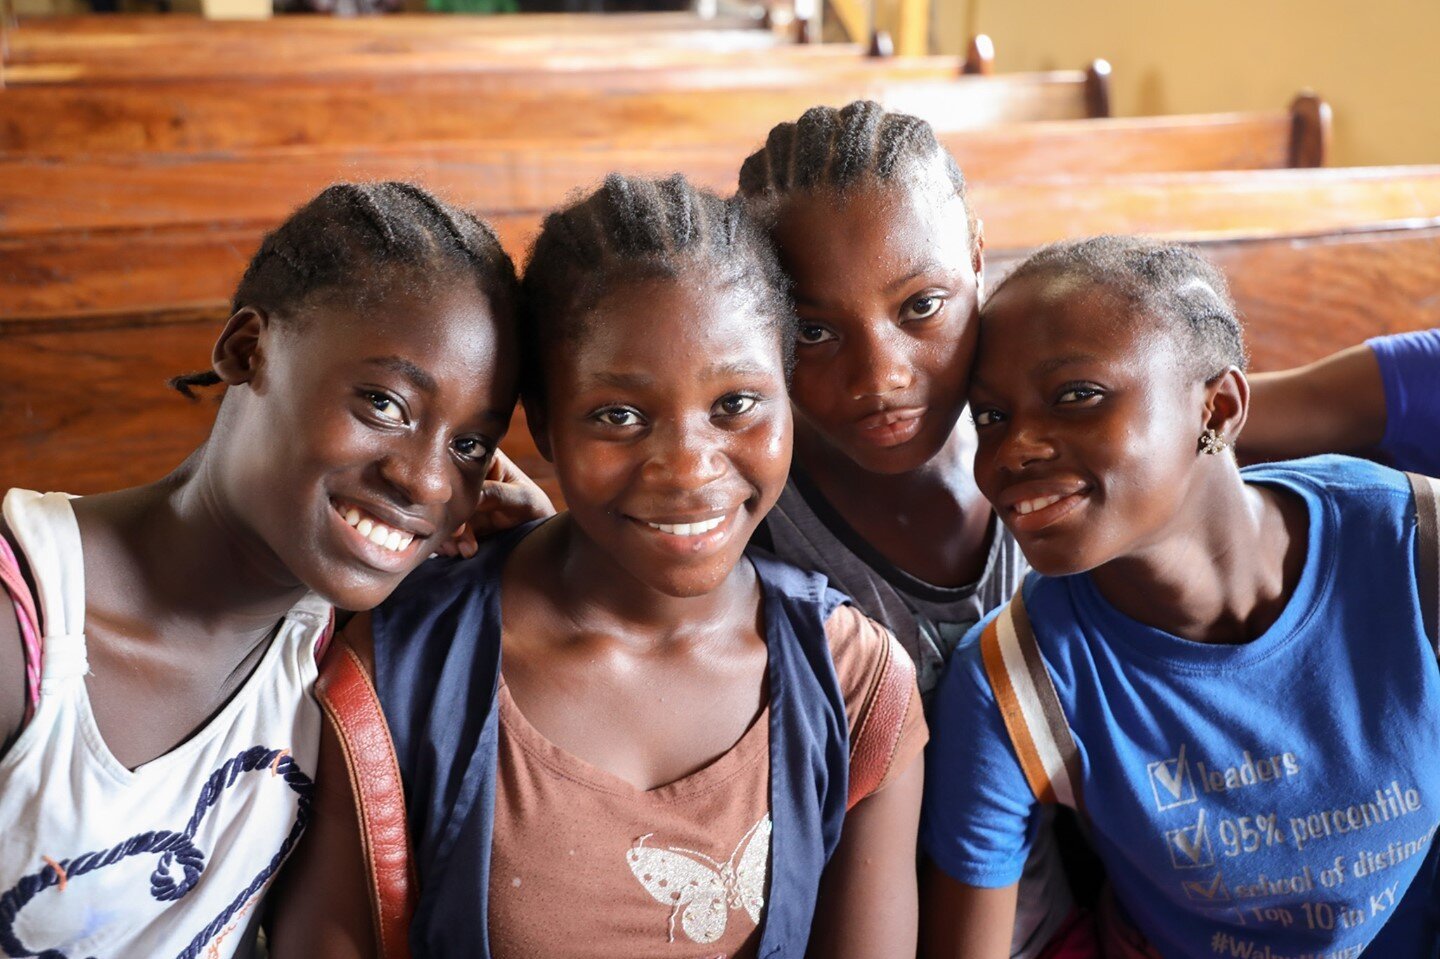 Liberia Fact: Did you know the average age of a Liberian citizen is 17.9 years old?
The Cova Project works to provide strong menstrual health education to young women  in Liberia, alongside our awesome partners @educatewestpoint